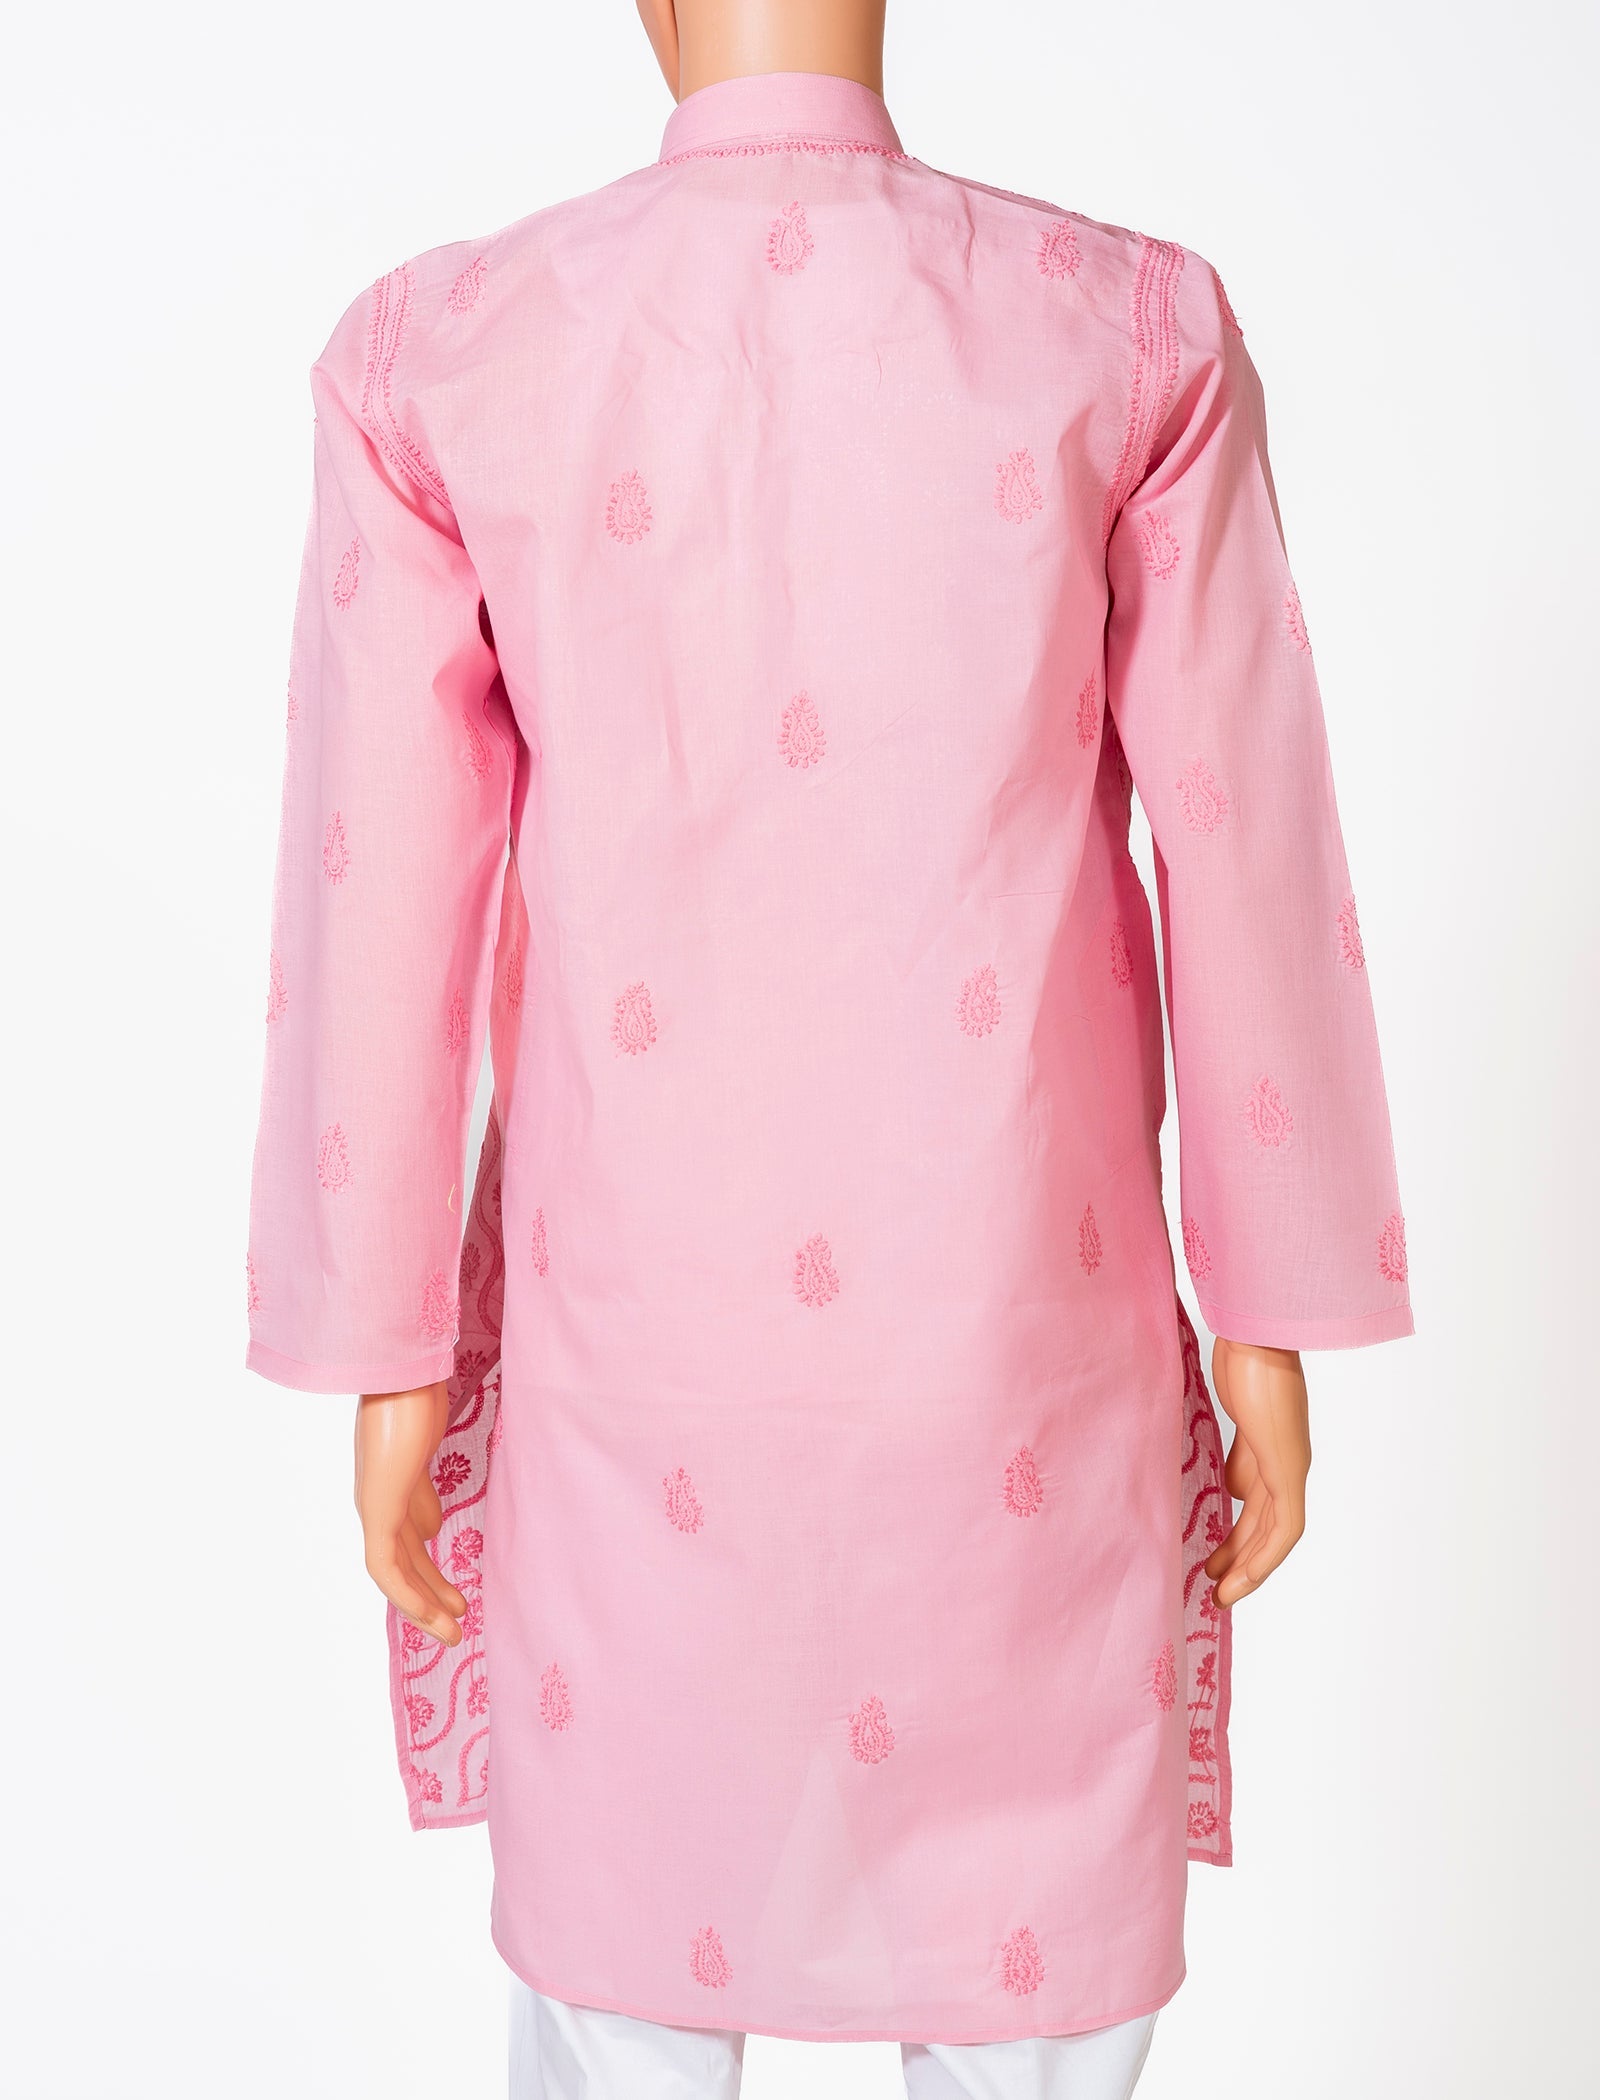 Lucknow Chikan Emporium Cotton Pink Colour Gents Kurta With Self Stripes And Fancy Hand Chikankari On Neck.